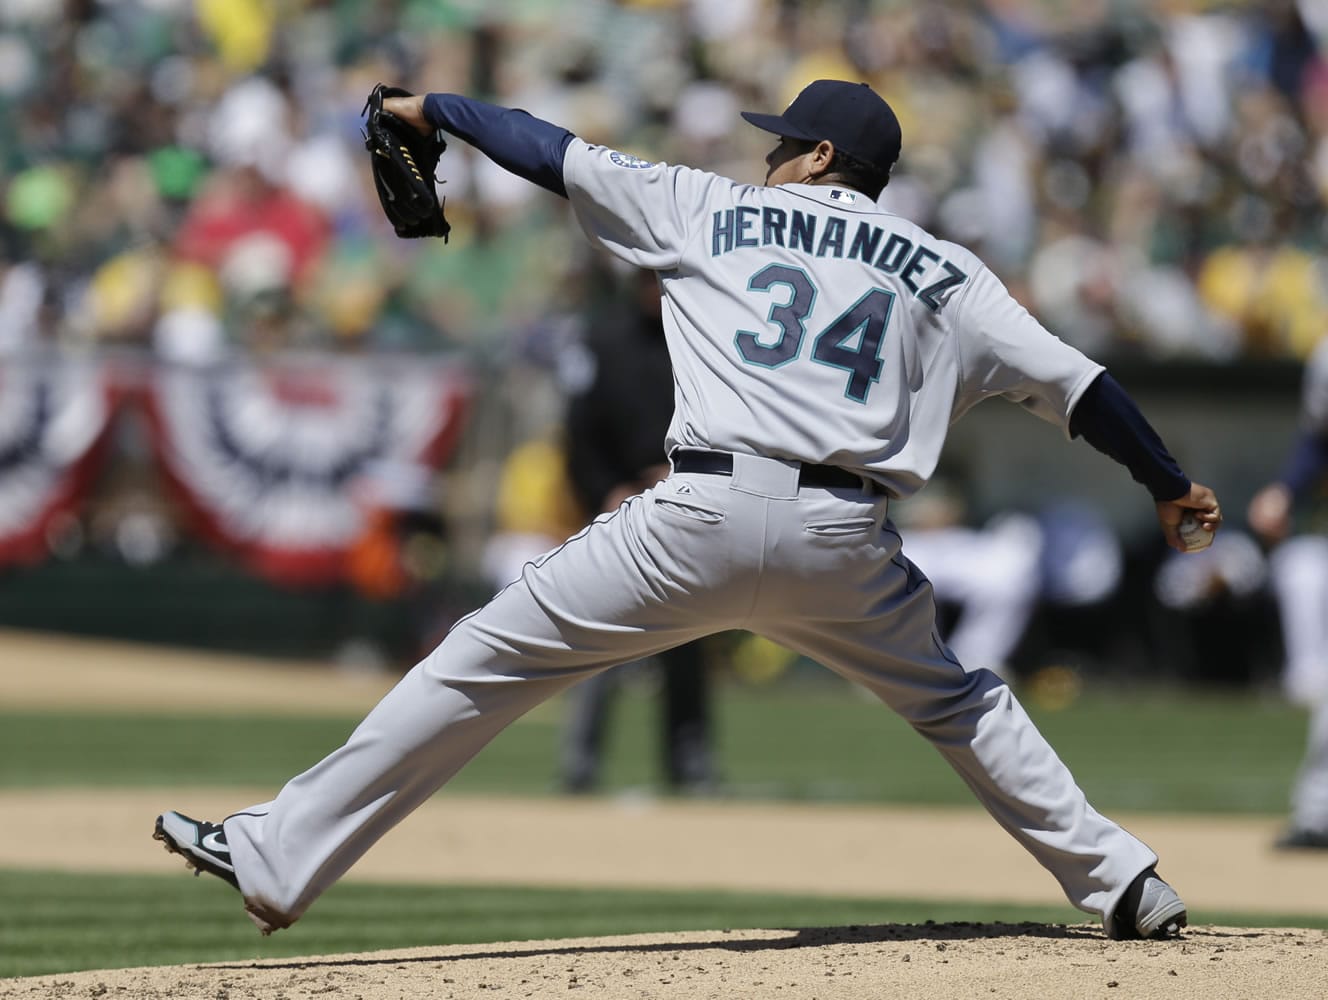 Seattle Mariners' Felix Hernandez retired the first 11 batters on the way to his 16th career win over the Athletics. The Mariners won 3-1 Saturday.